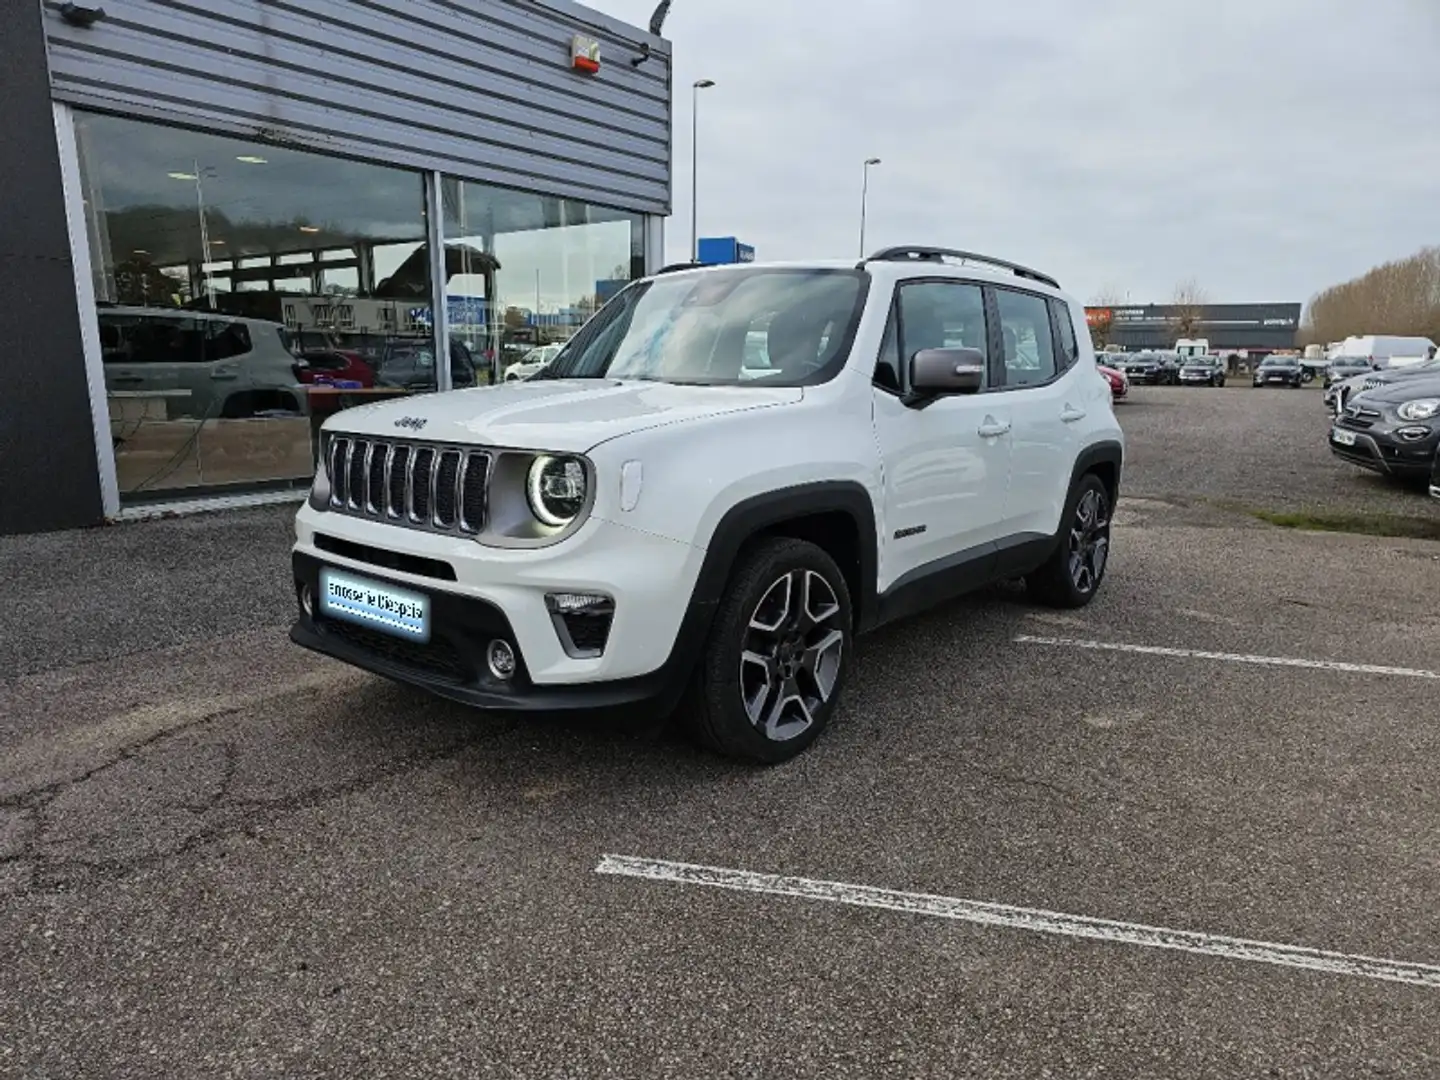 Jeep Renegade 1.6 MultiJet 120ch Limited BVR6 - 1